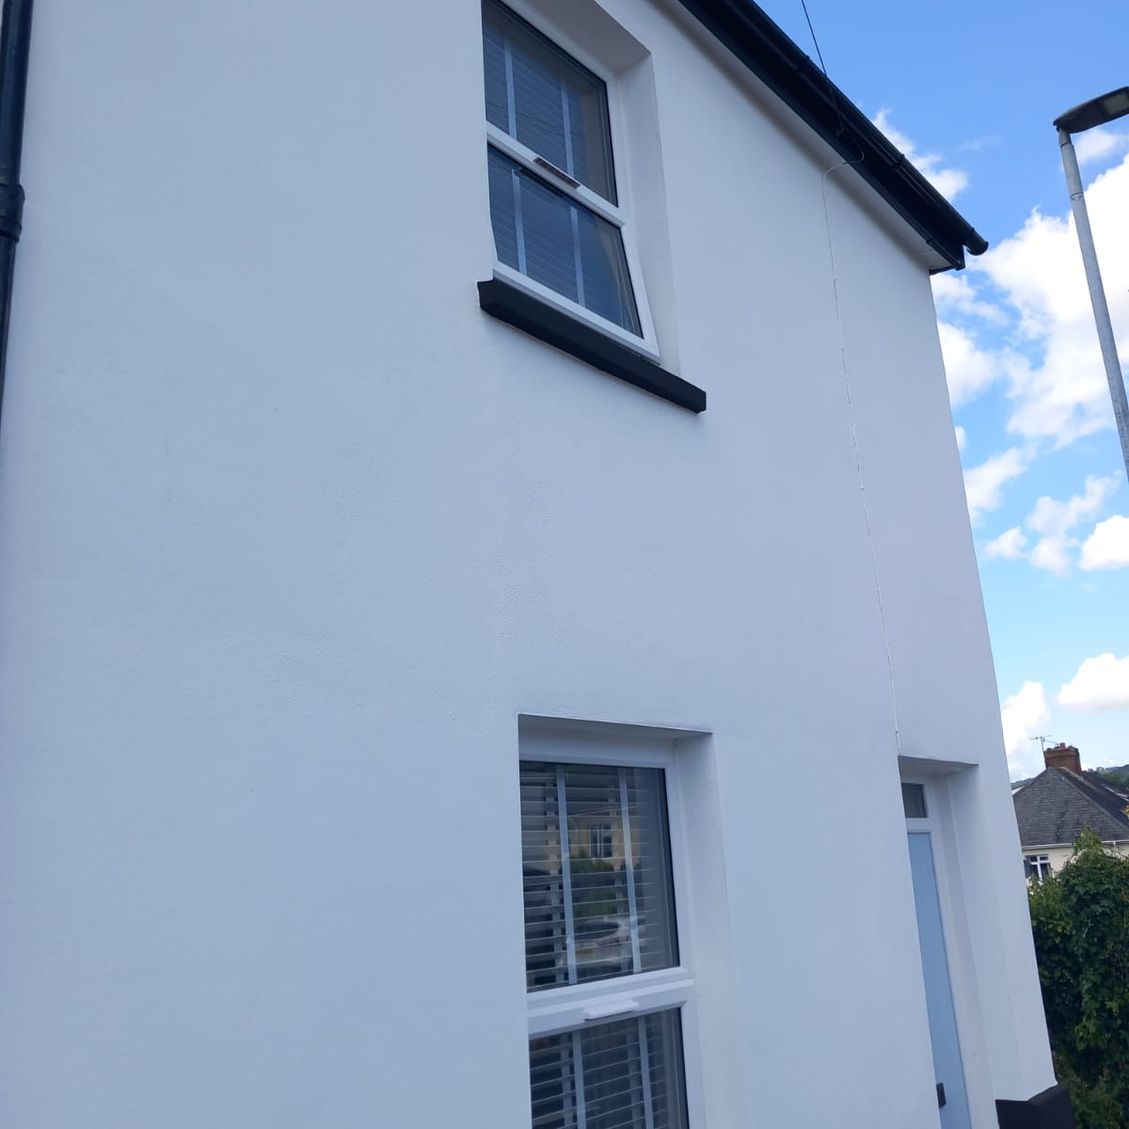 Lime render, smooth flat finish